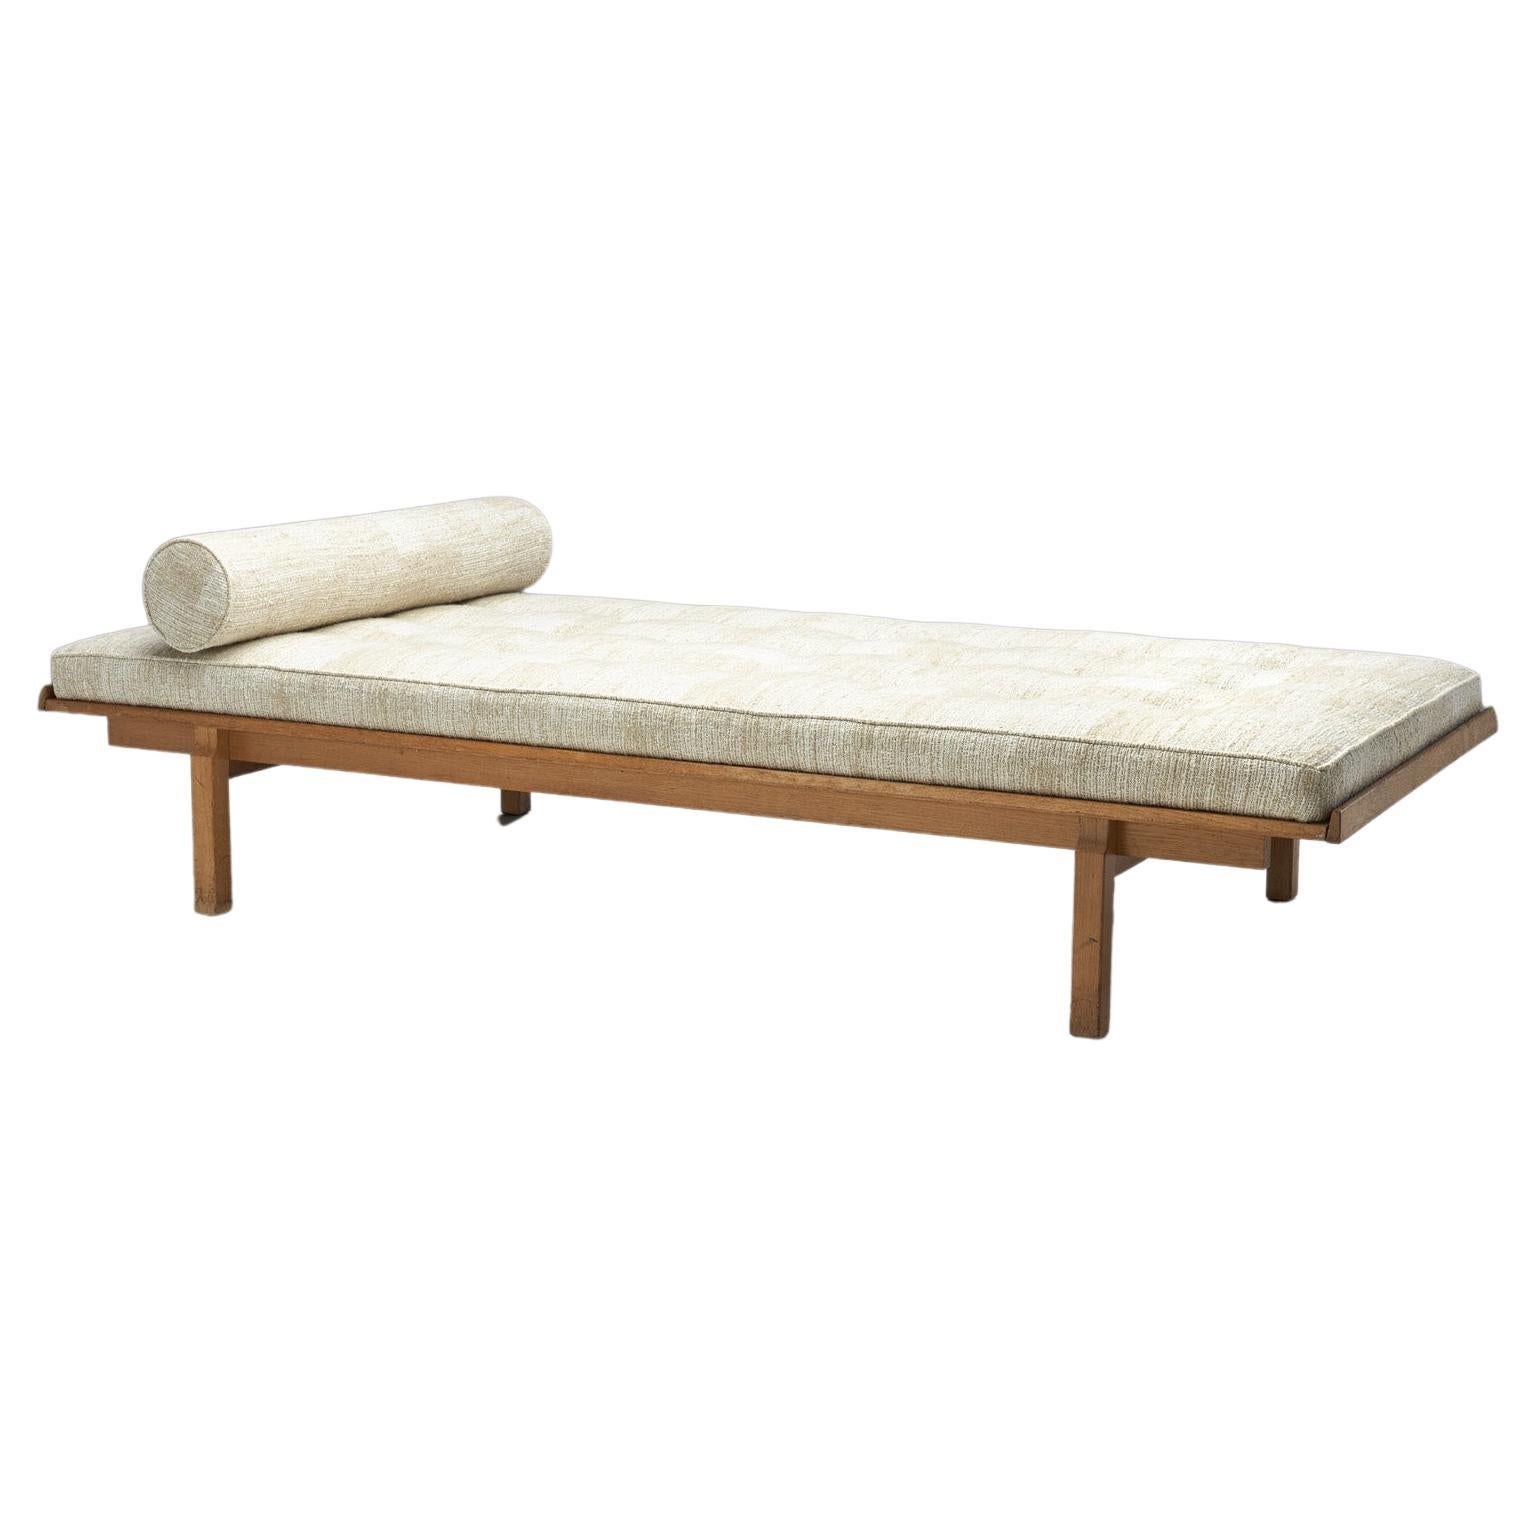 Danish Oak Daybed with Upholstered Mattress and Pillow, Denmark, ca 1950s